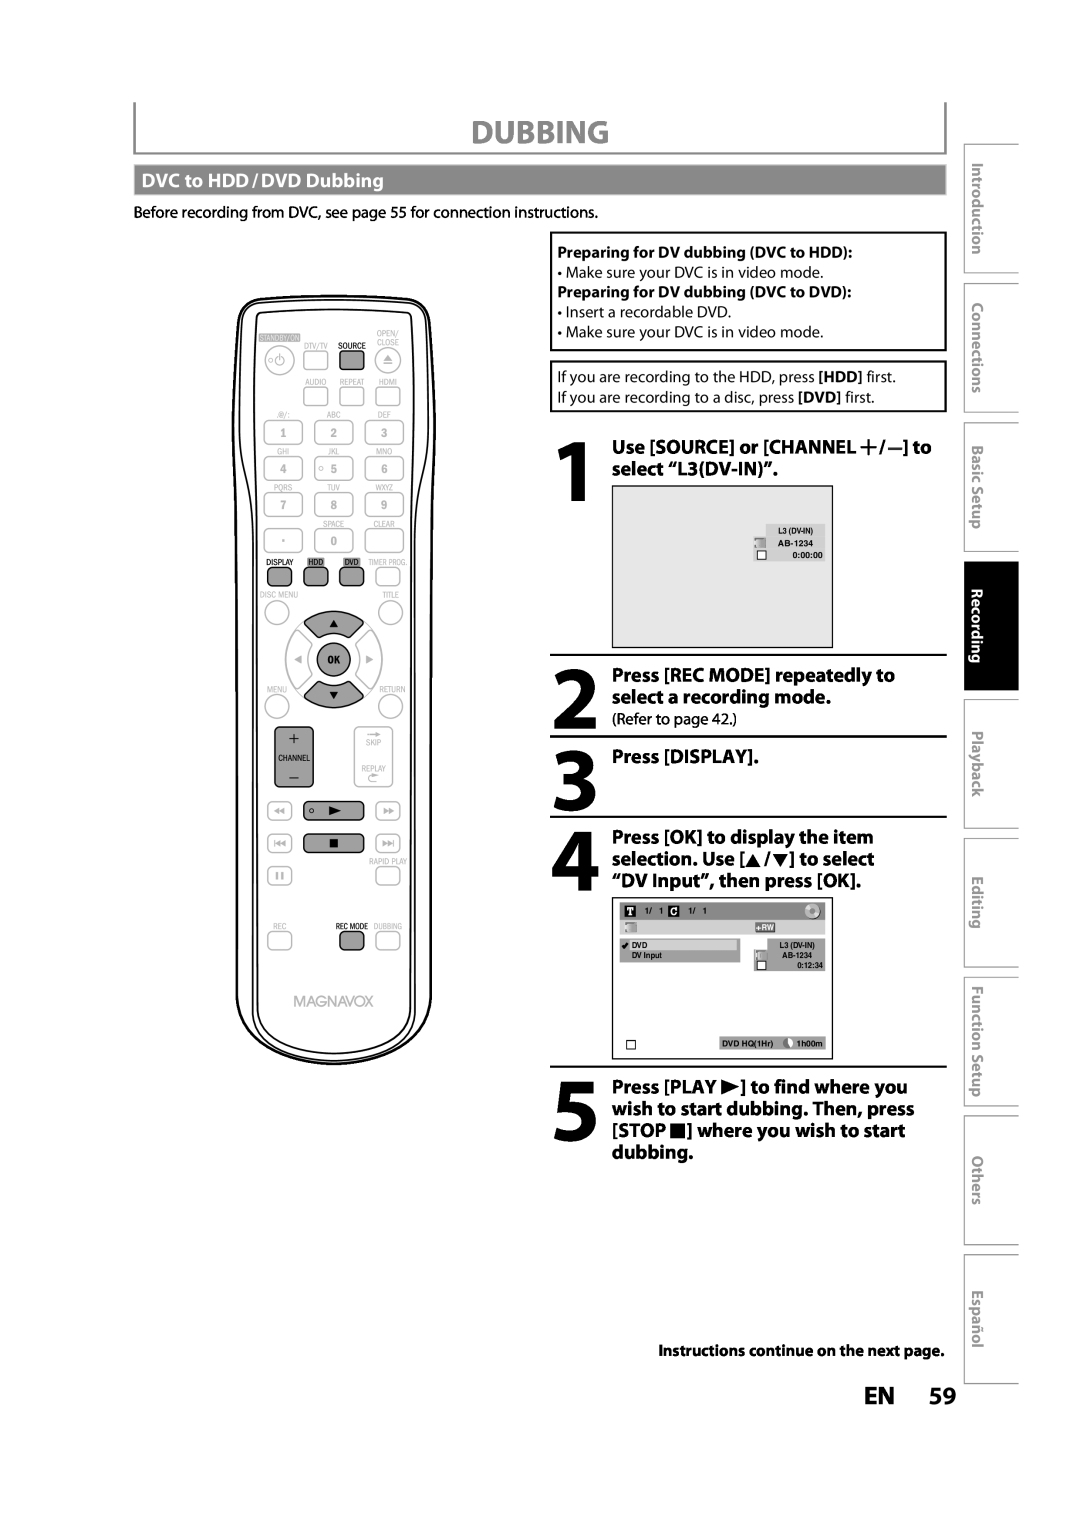 Magnavox MDR533H DVC to HDD / DVD Dubbing, Use SOURCE or CHANNEL / to, select “L3DV-IN”, Press PLAY B to find where you 